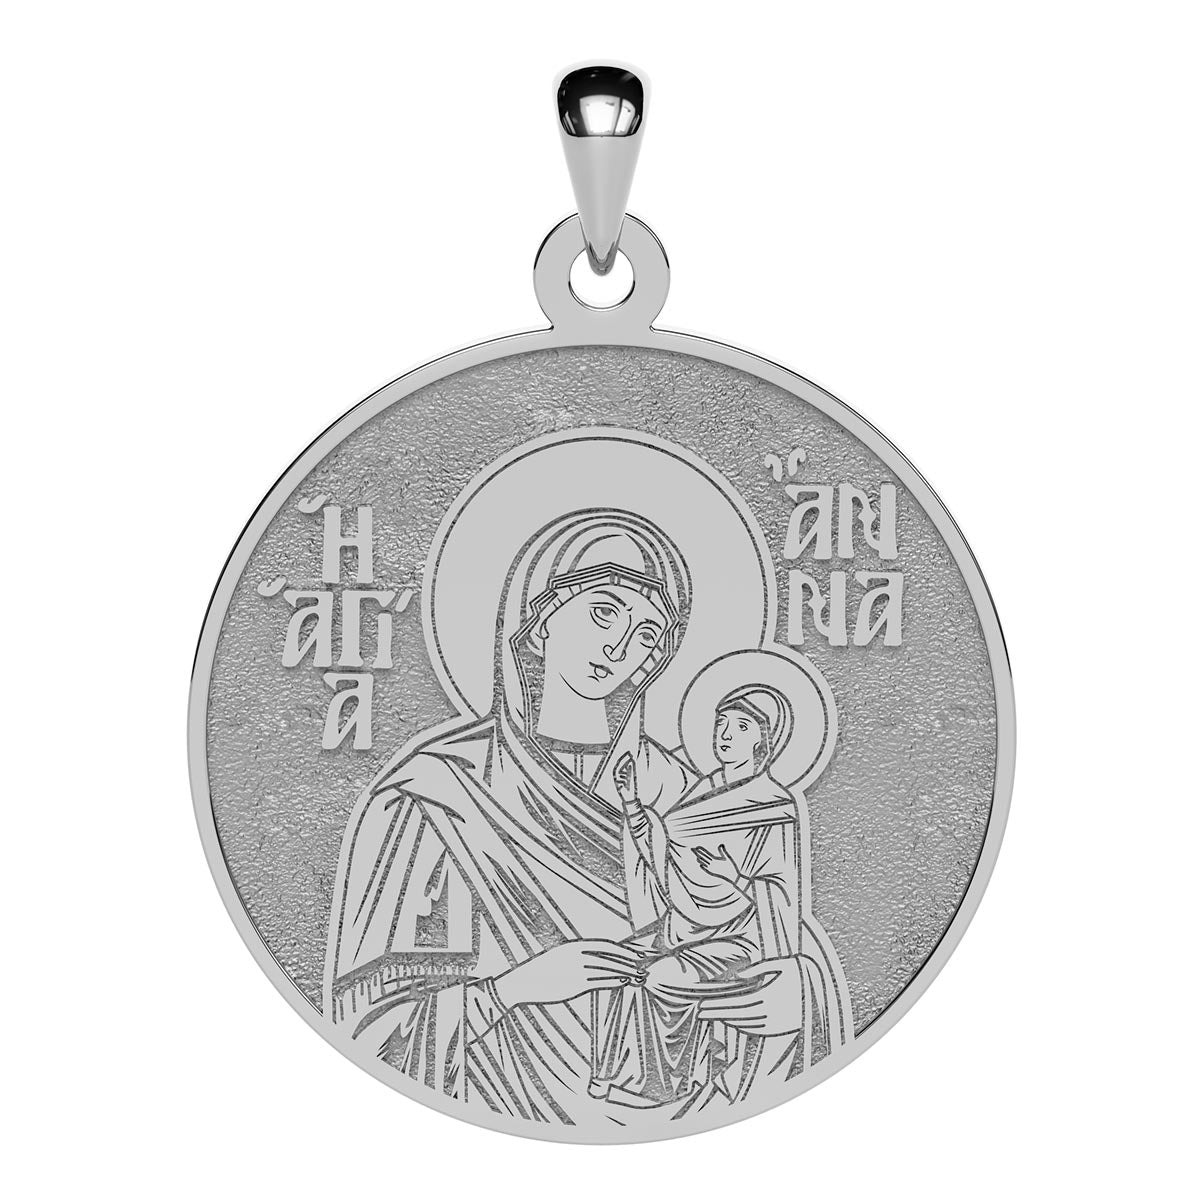 Saint Anna (Anne) Mother of Virgin Mary Greek Orthodox Icon Round Medal